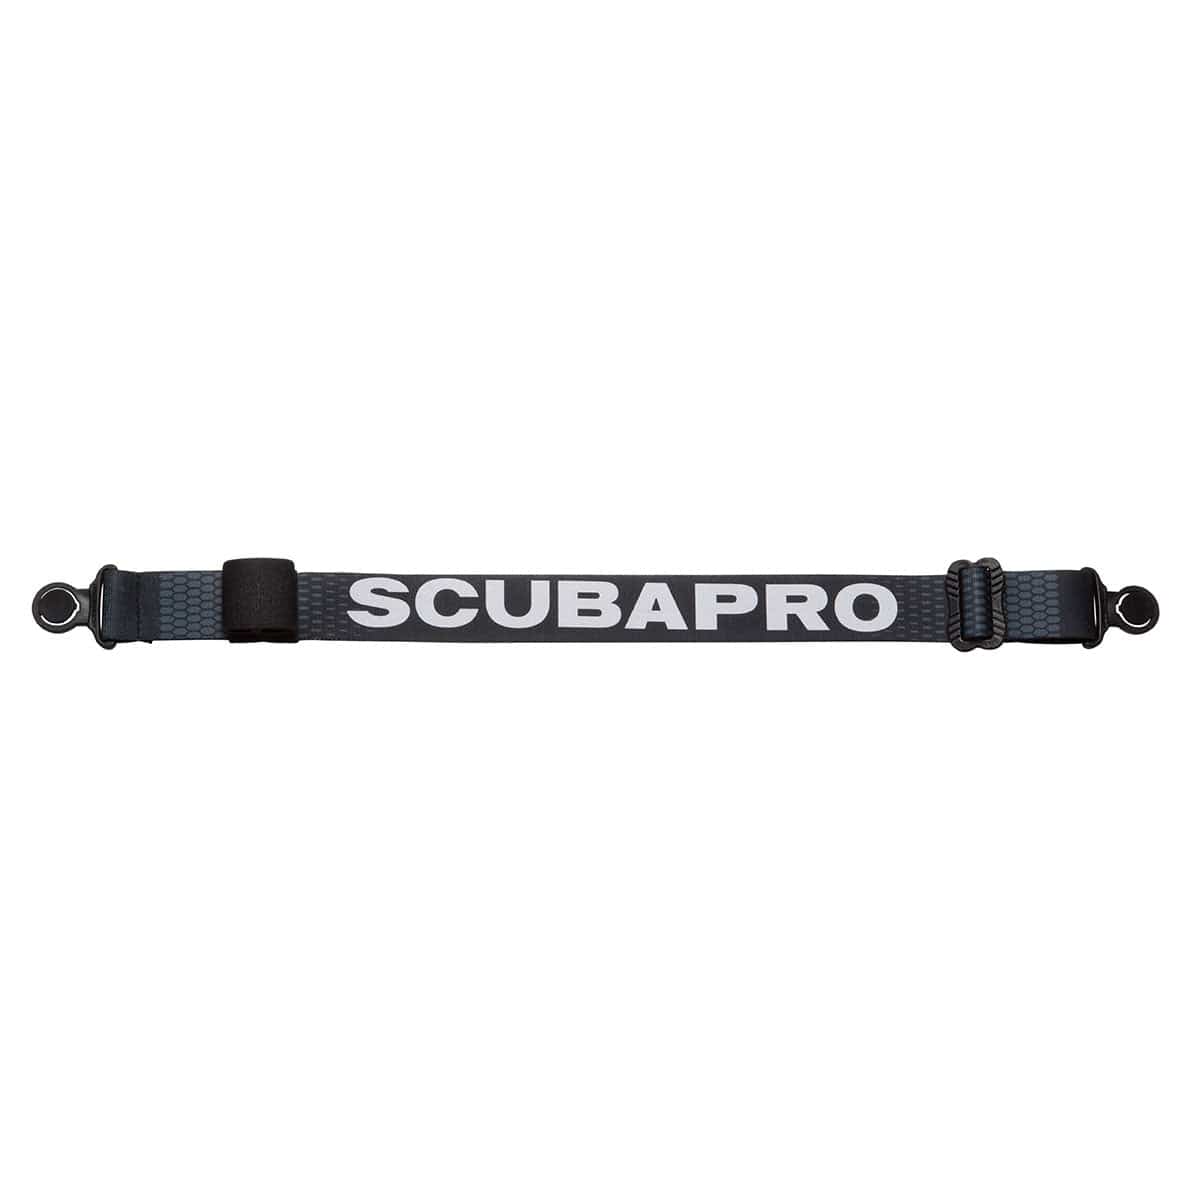 Scubapro Comfort Strap - Turquoise - 24.730.020-NED - 26